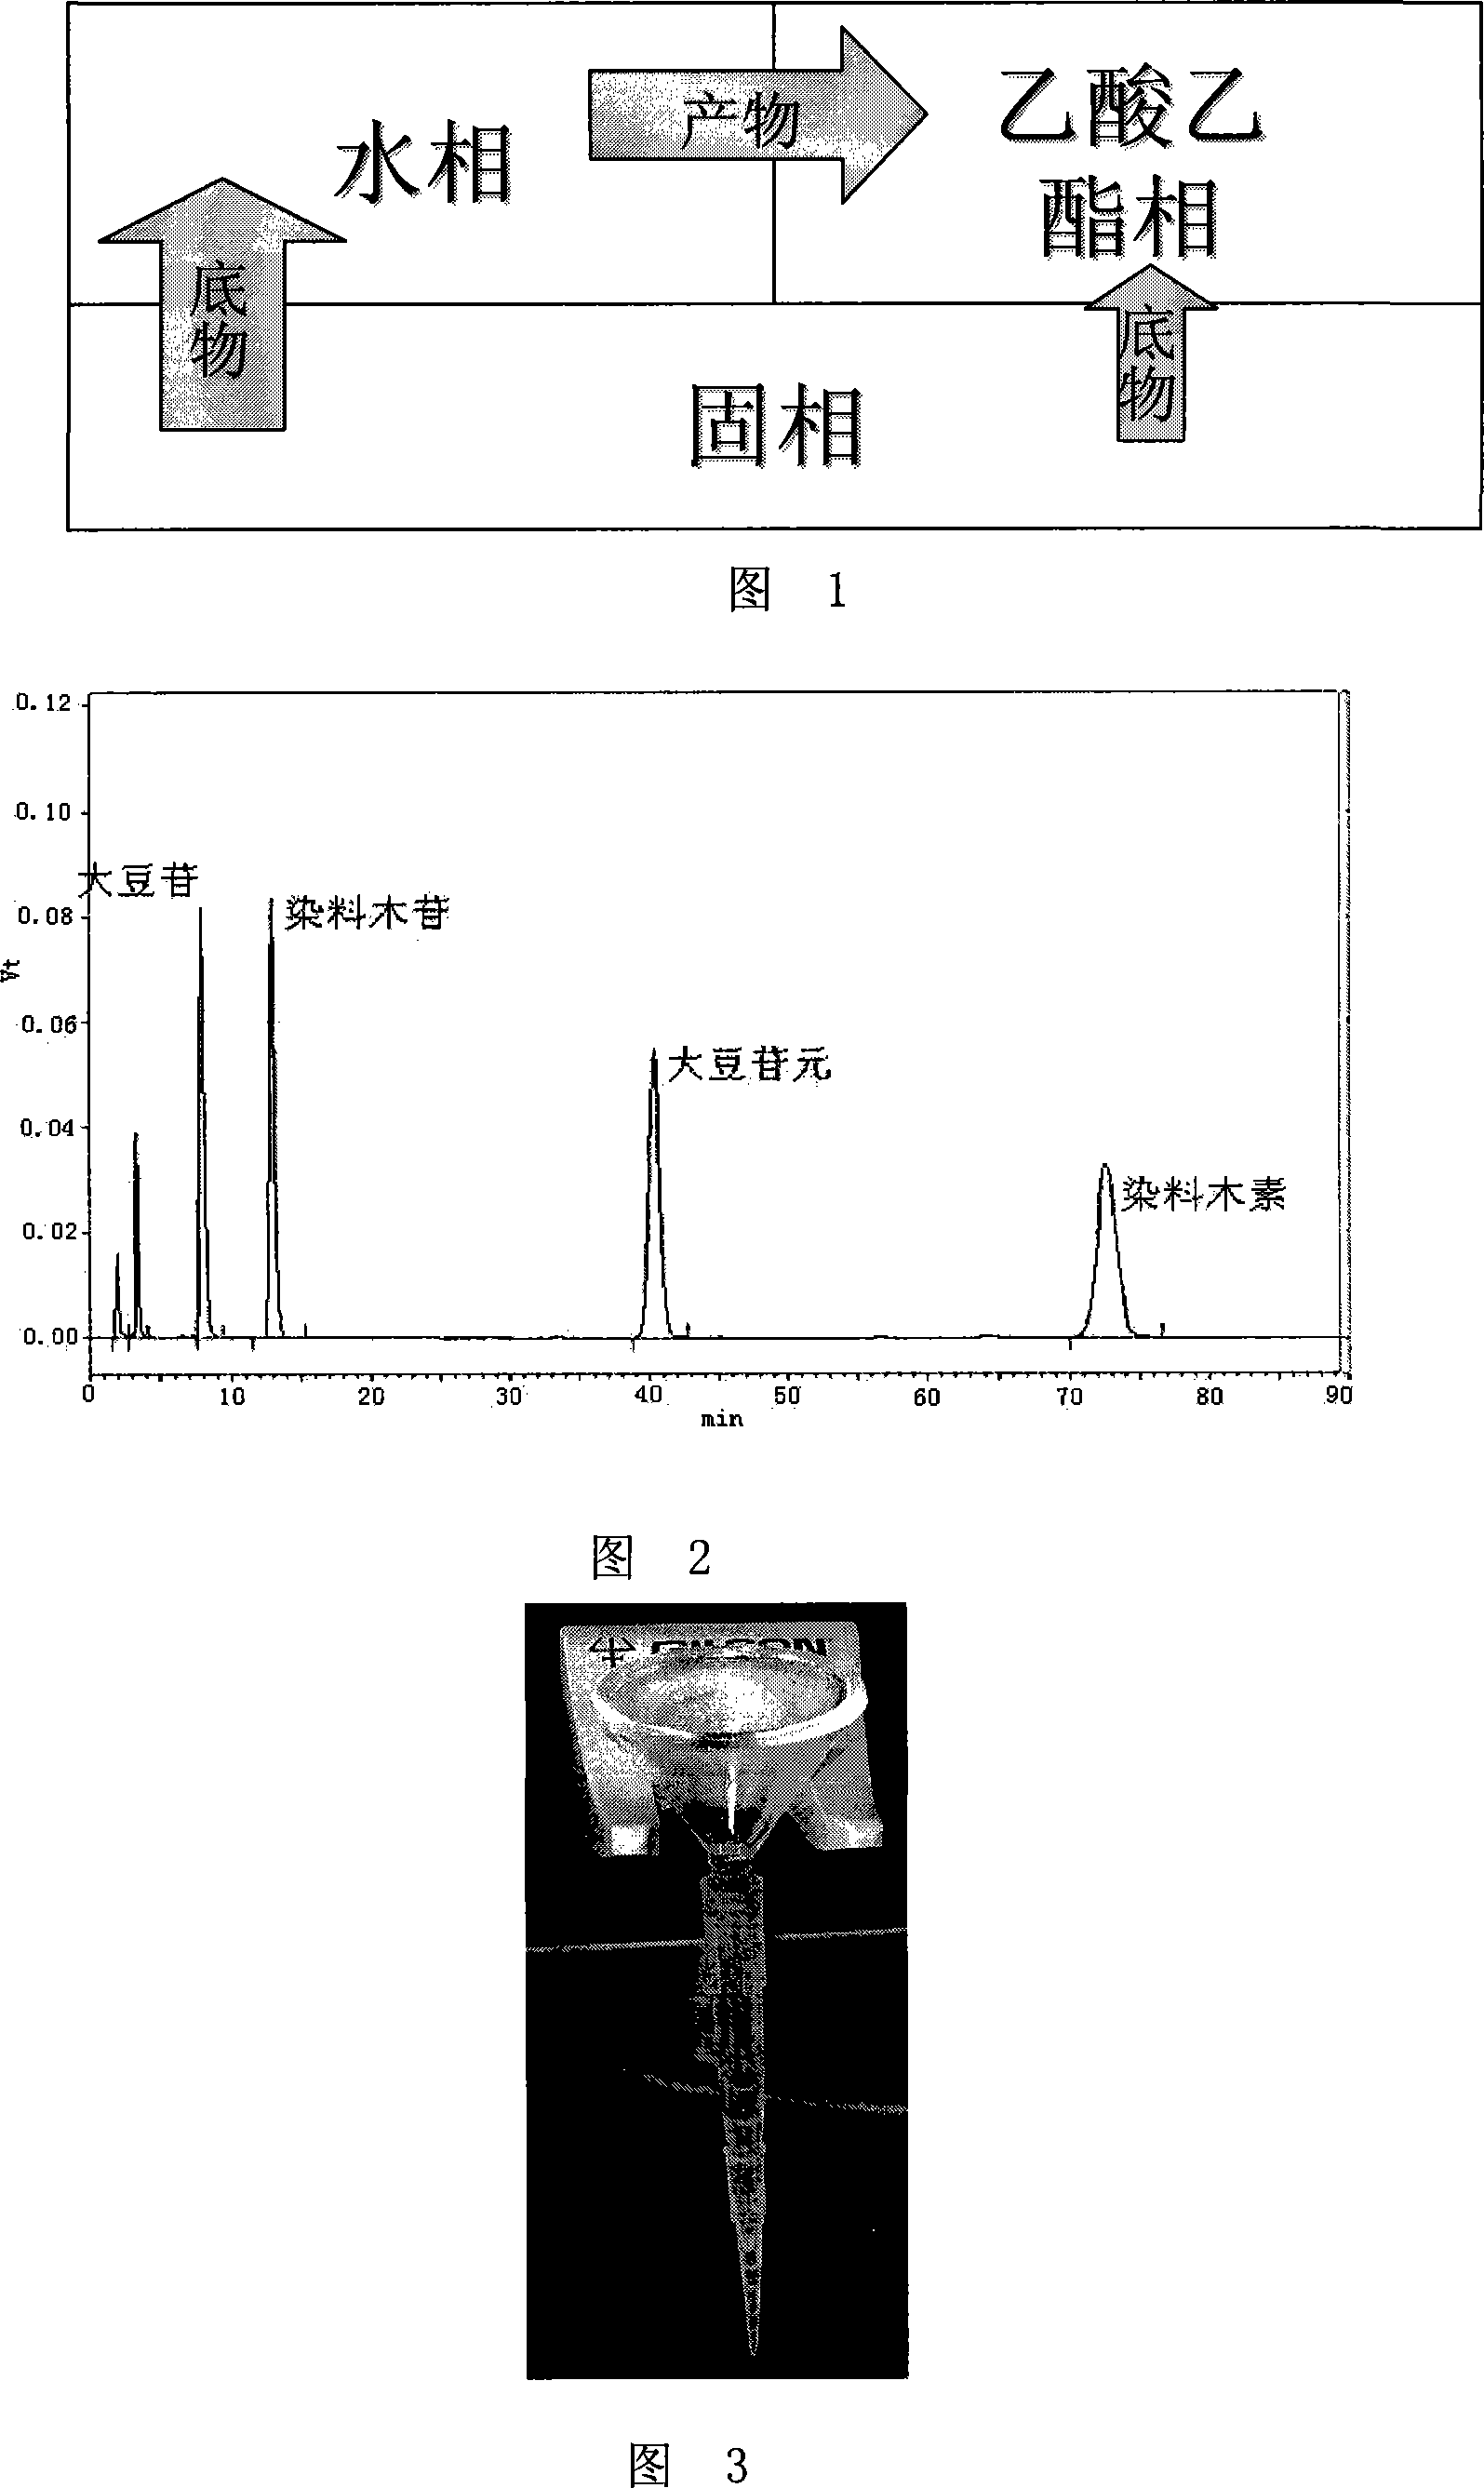 Method for hydrolyzing soybean isoflavone by enzyme